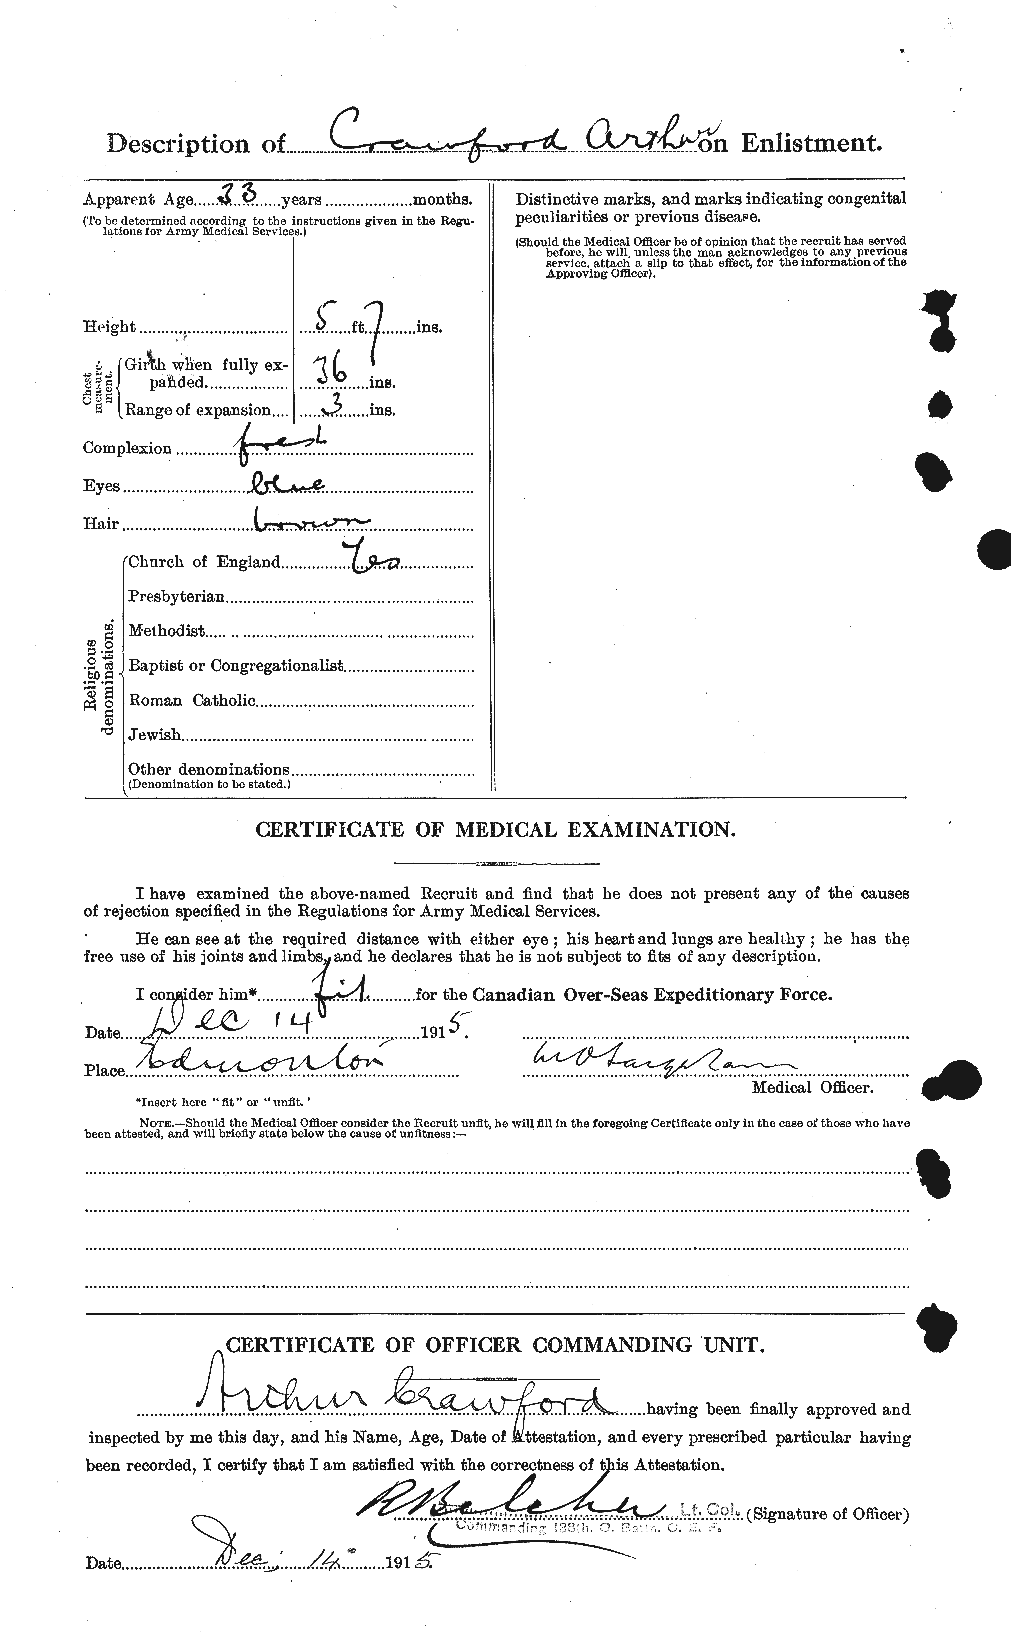 Personnel Records of the First World War - CEF 060931b